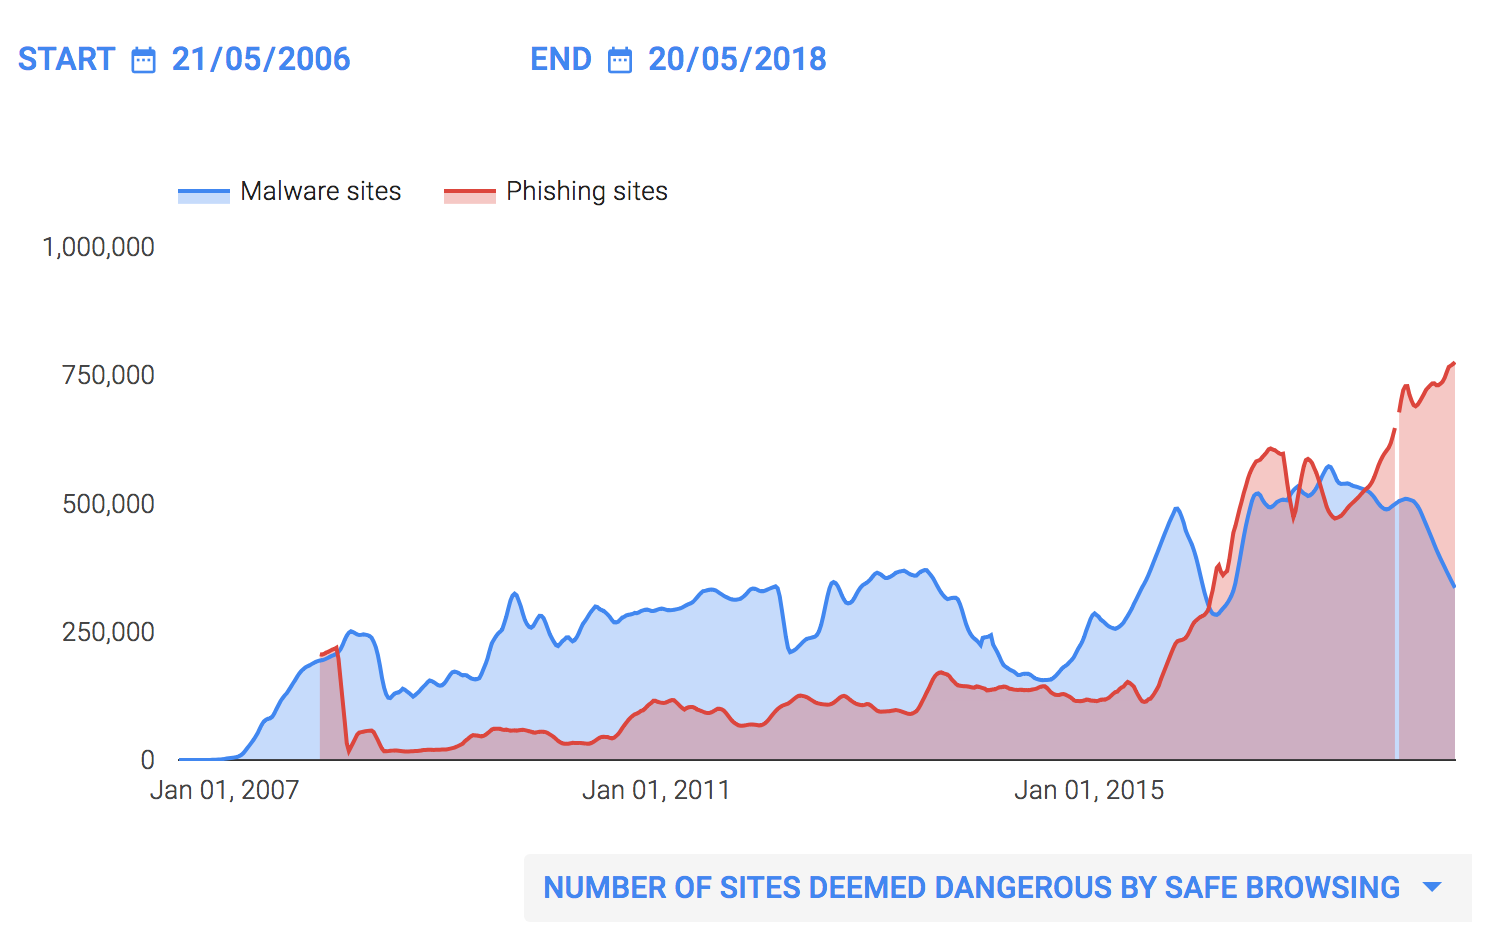 Google reports that the number of phishing websites has skyrocketed over the past decade